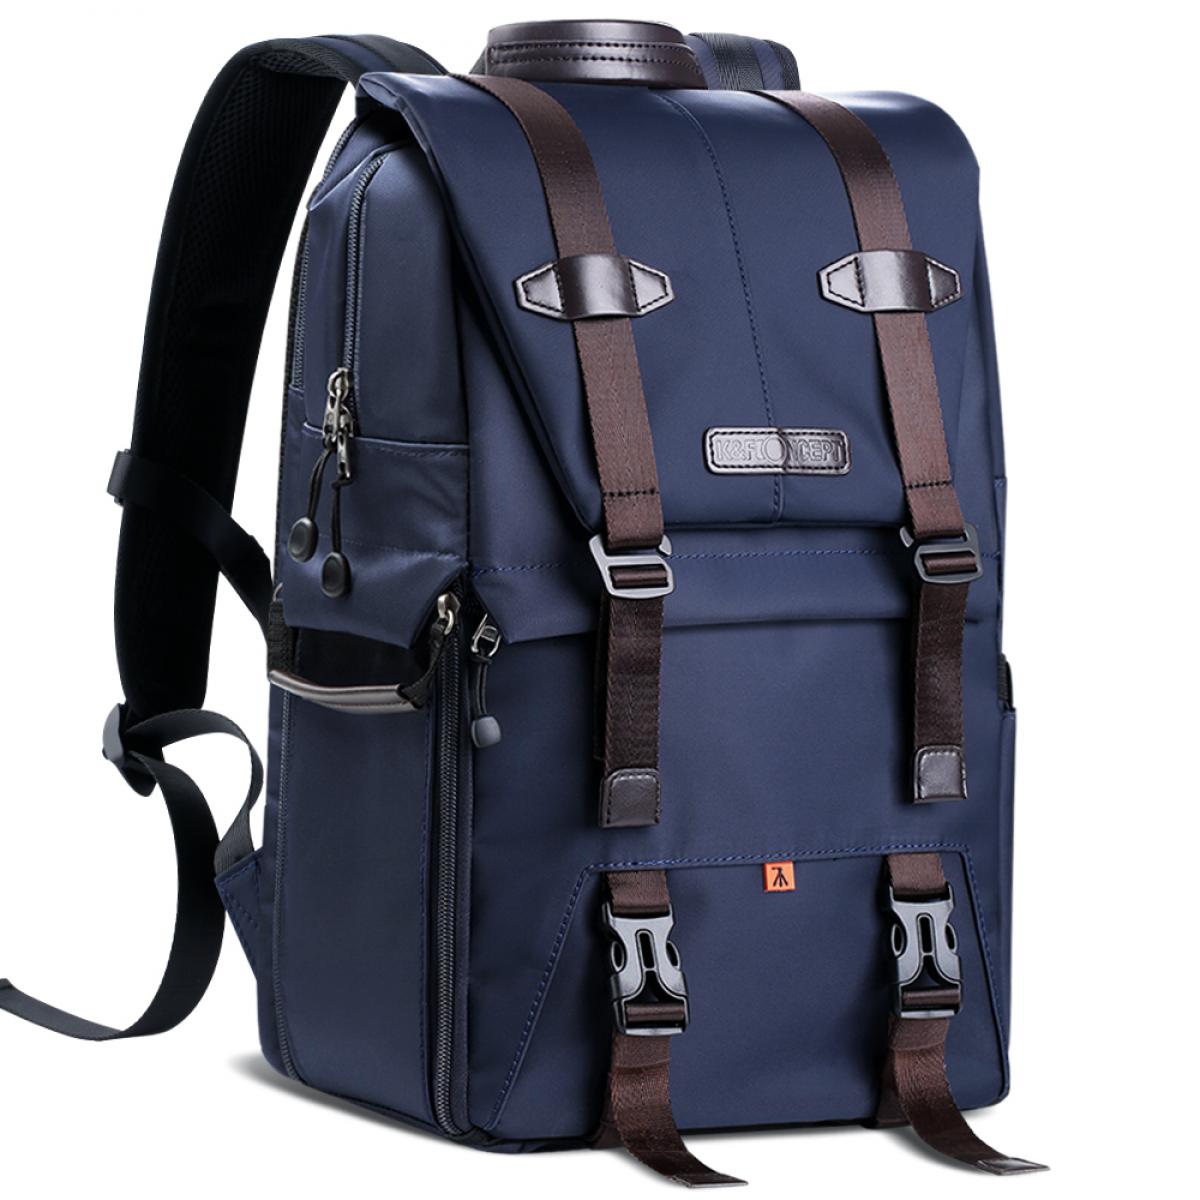 K&F Concept DSLR Travel Backpack Gear Review - Casual Photophile